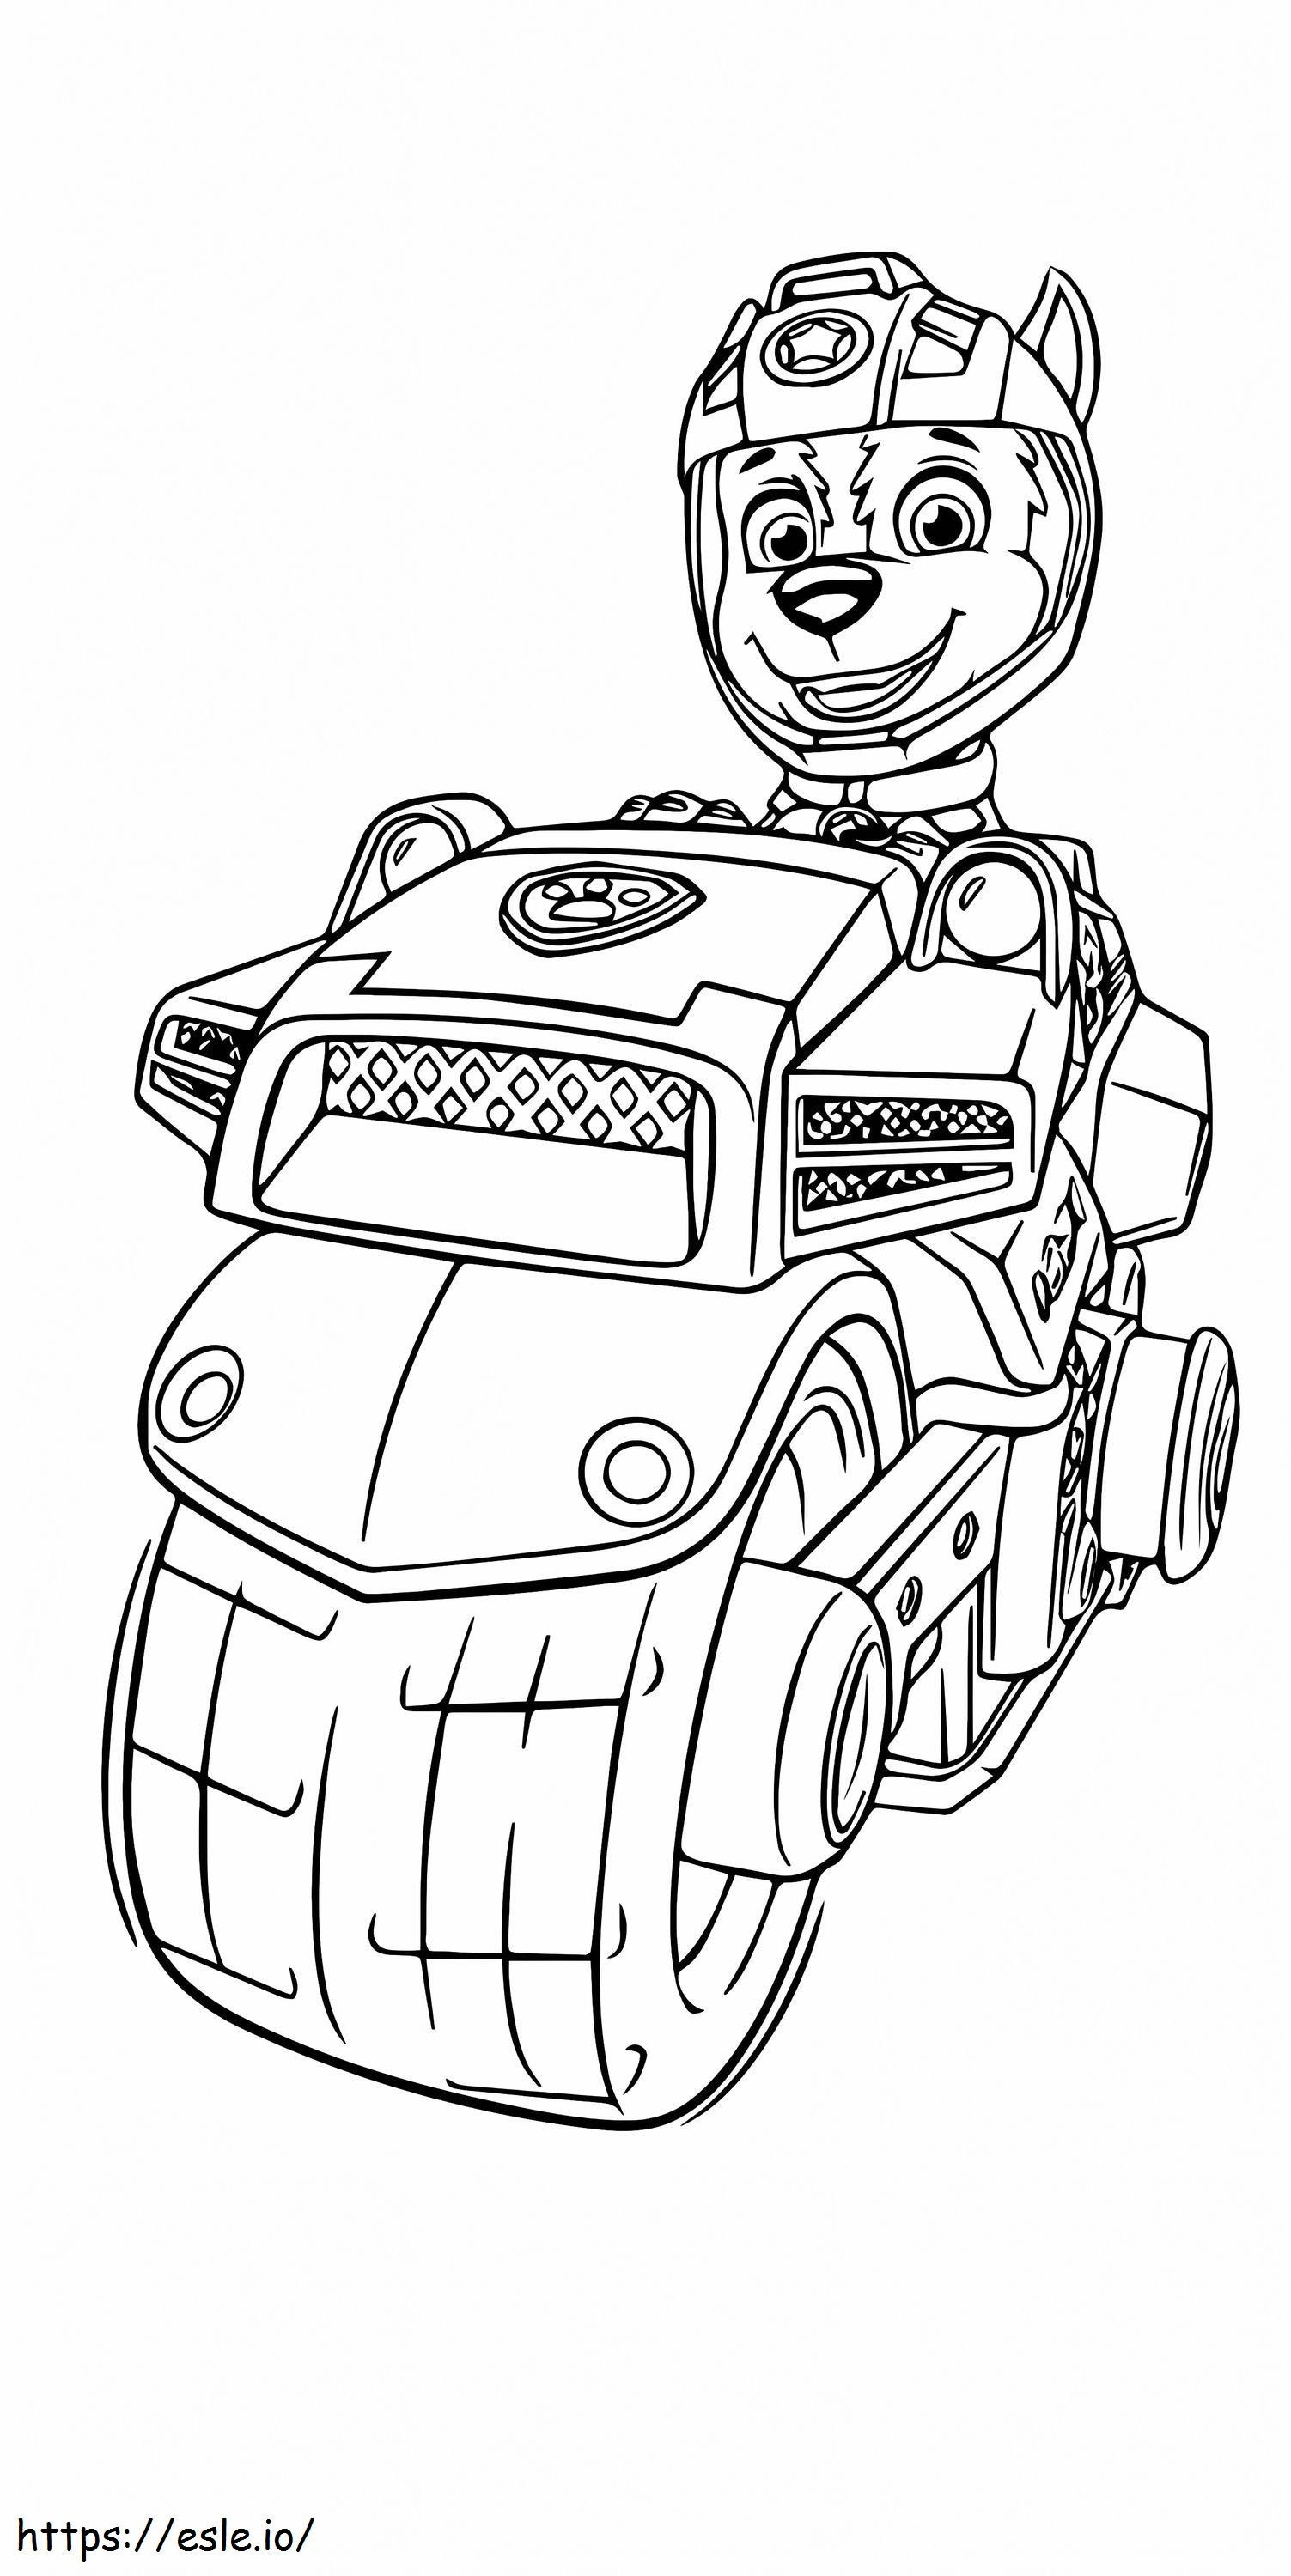 Paw Patrol Moto Pups With Motorcycles coloring page